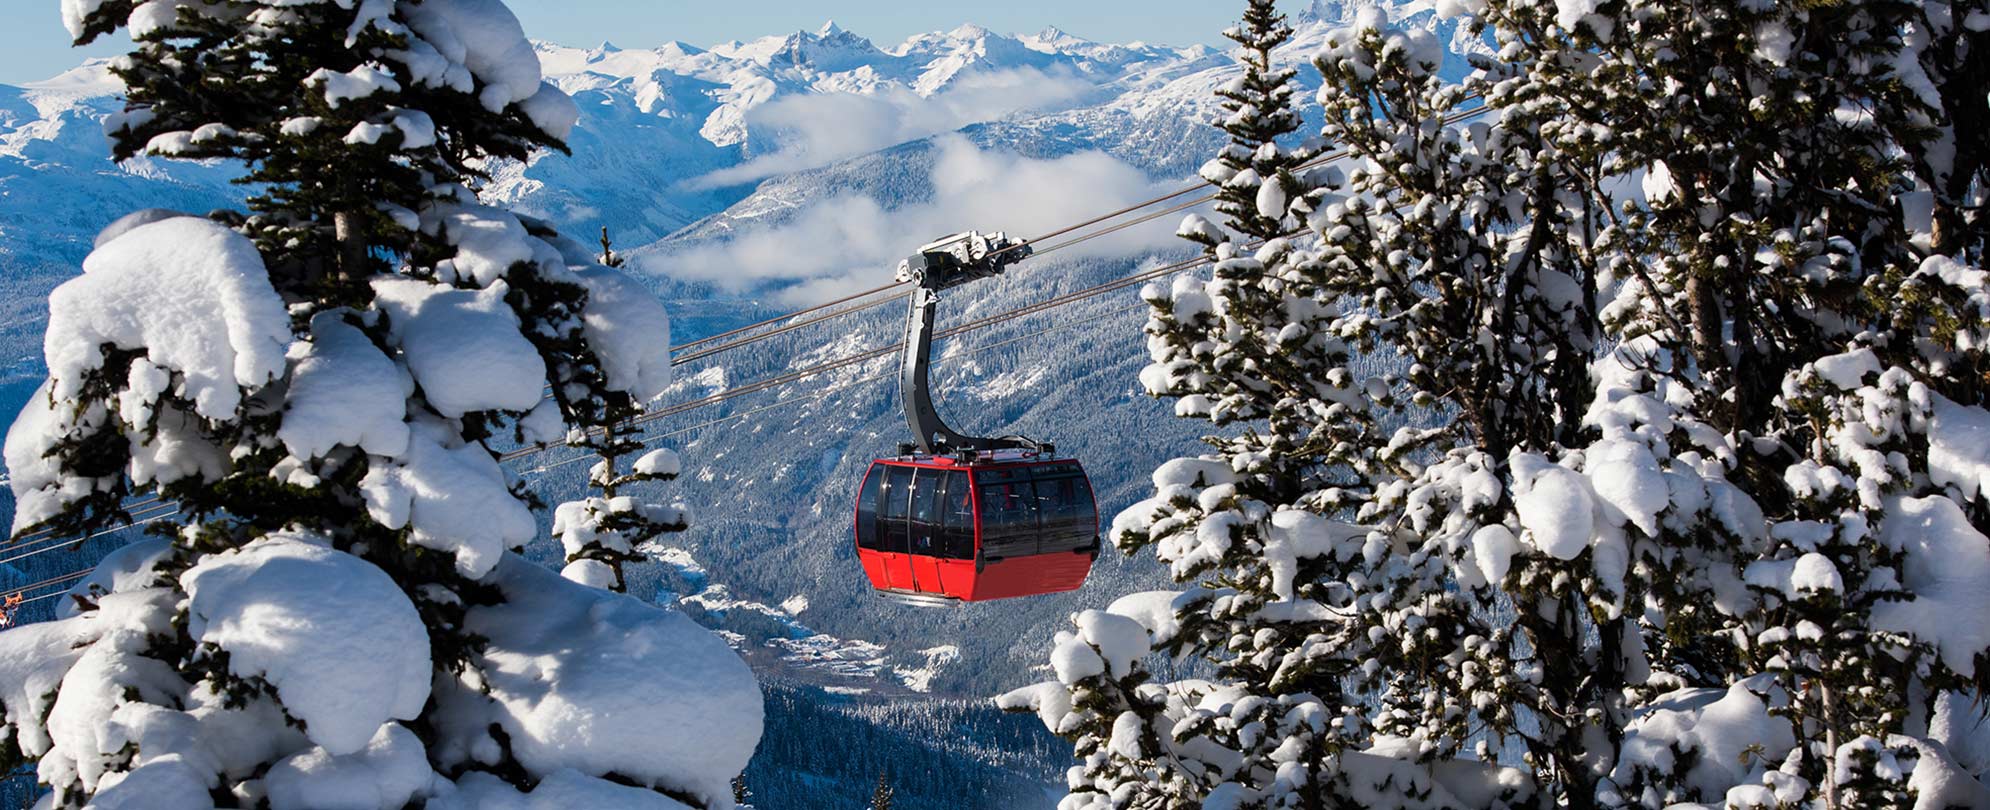 A red gondola is hanging between snowy trees and a mountain background.